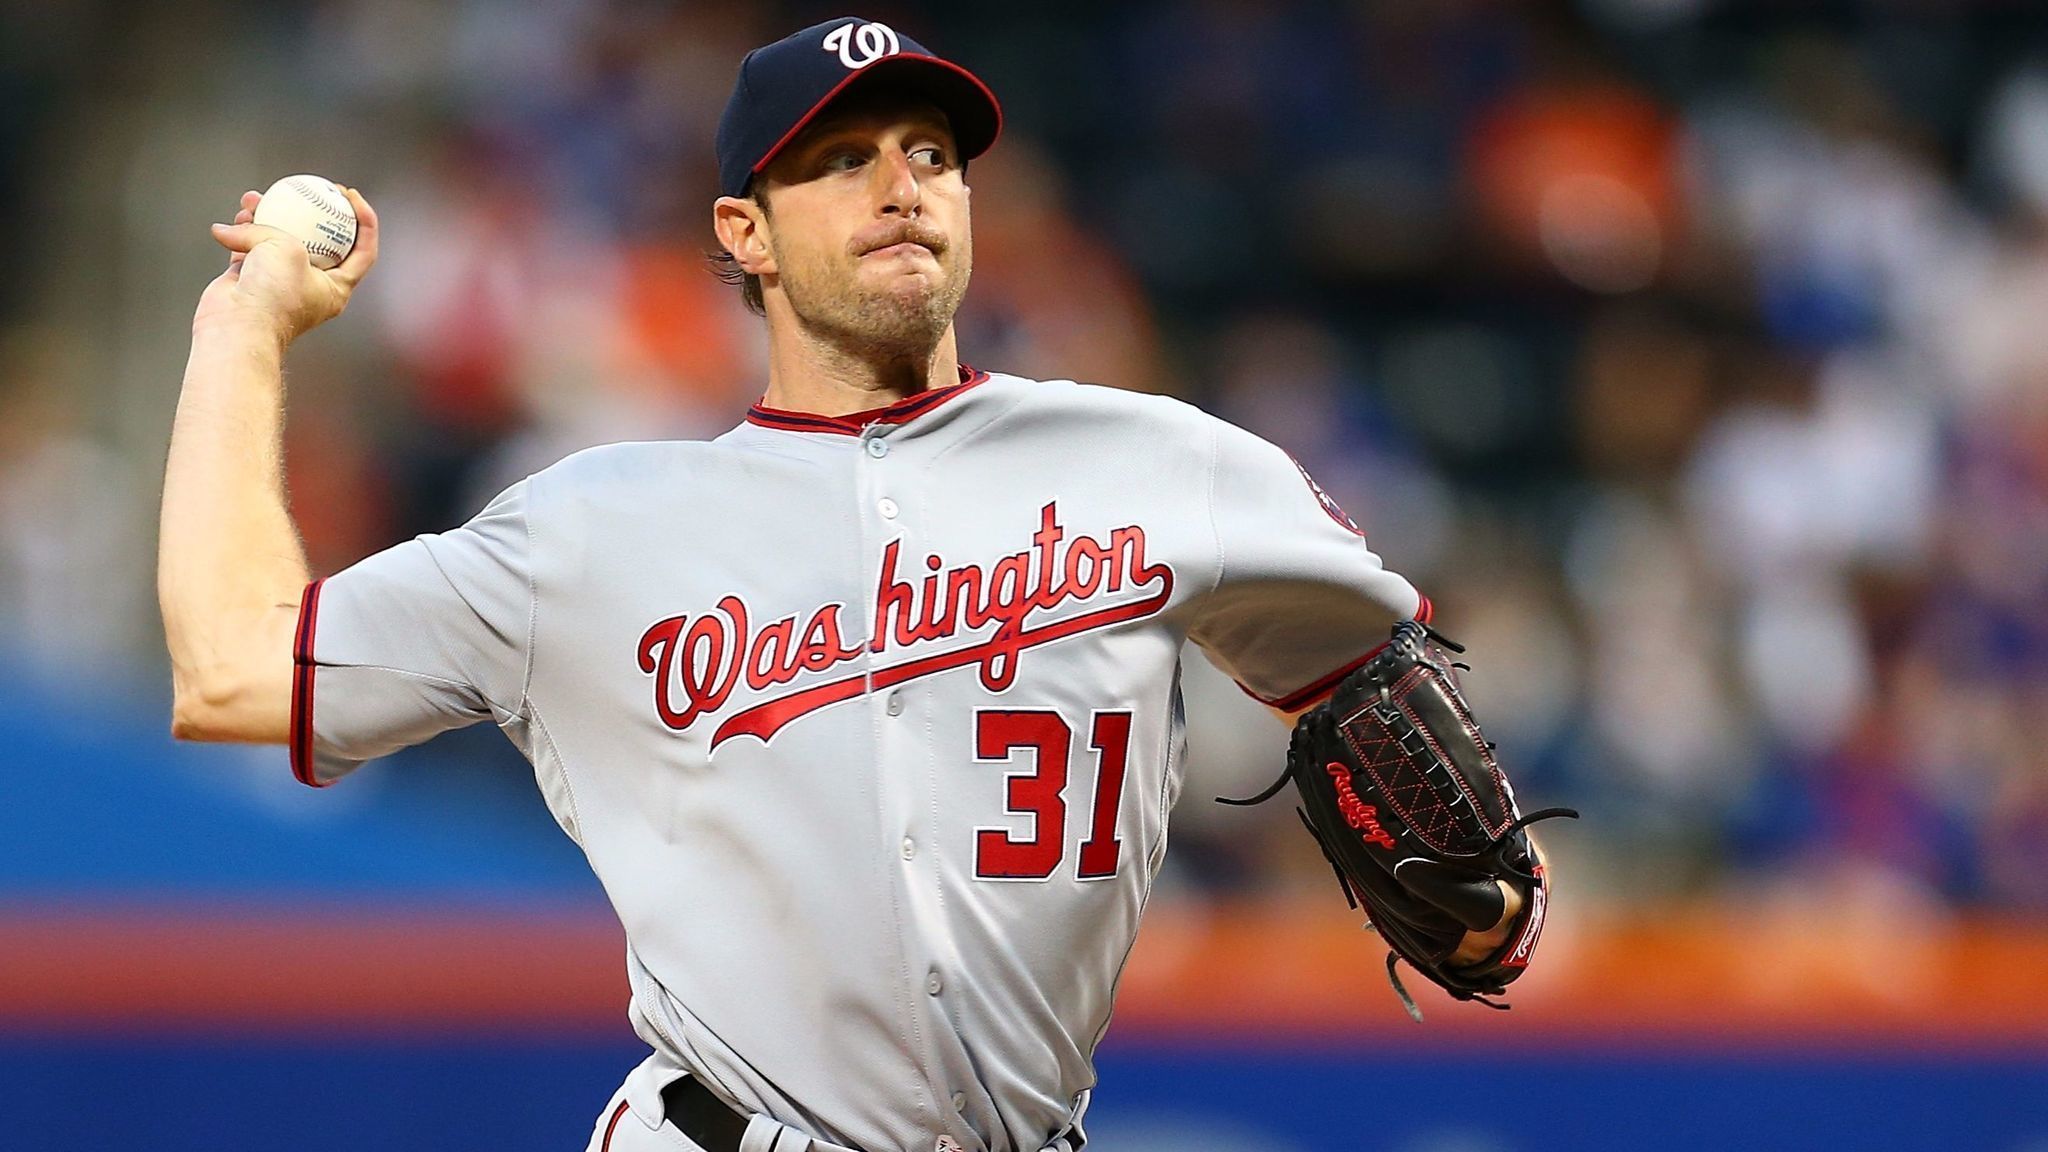 Preview: Nationals vs. Marlins, Wednesday, 12:10 p.m.